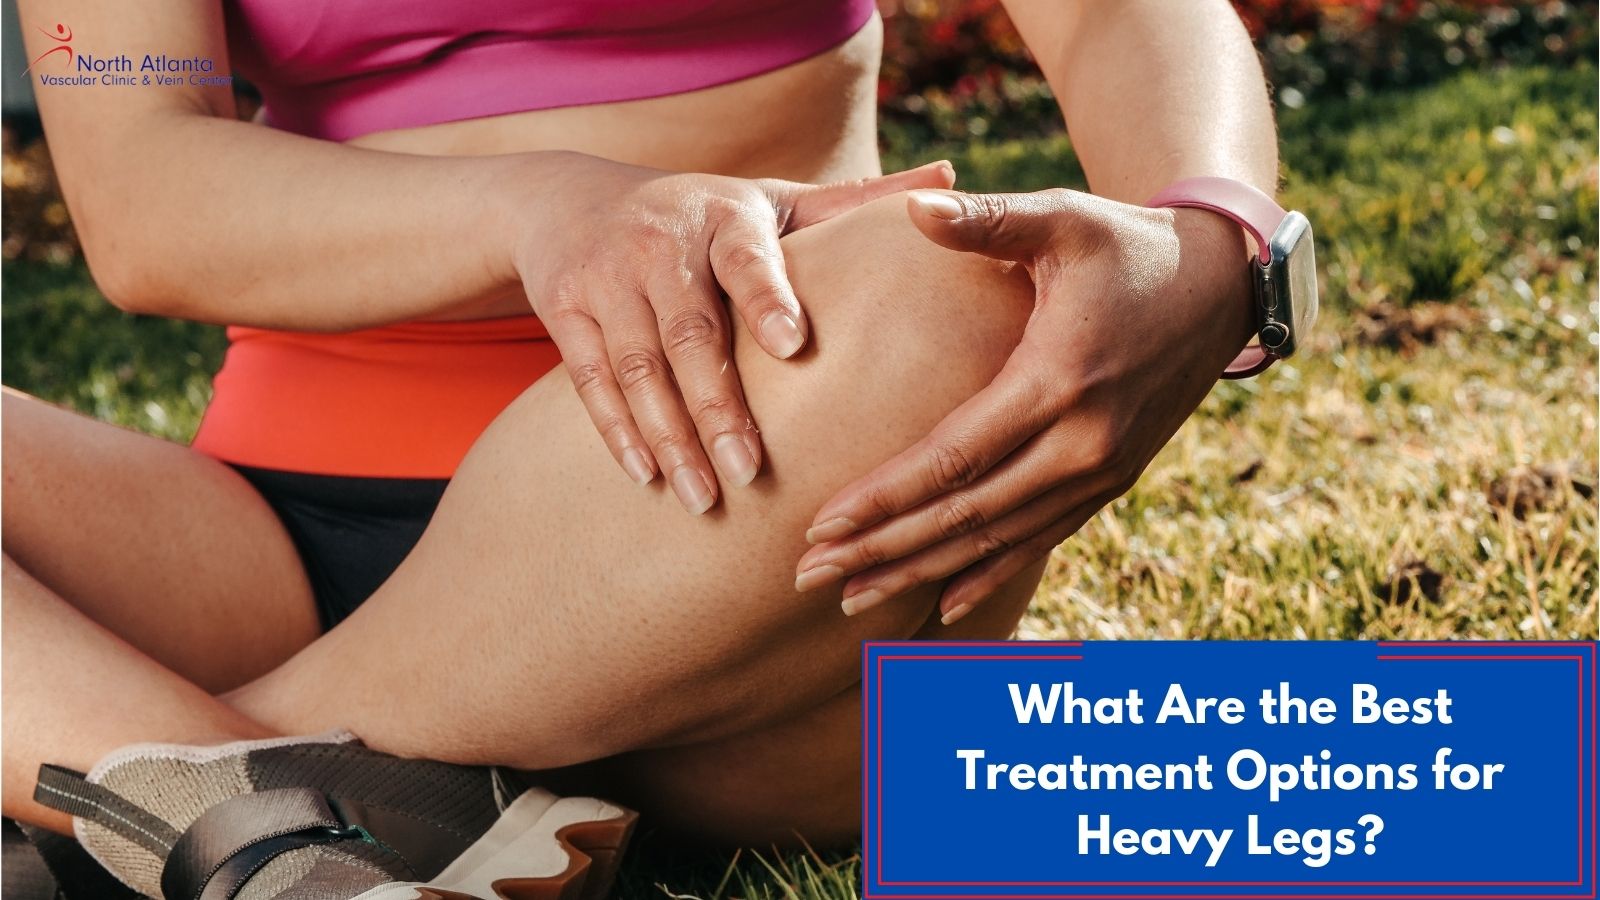 What Are the Best Treatment Options for Heavy Legs?